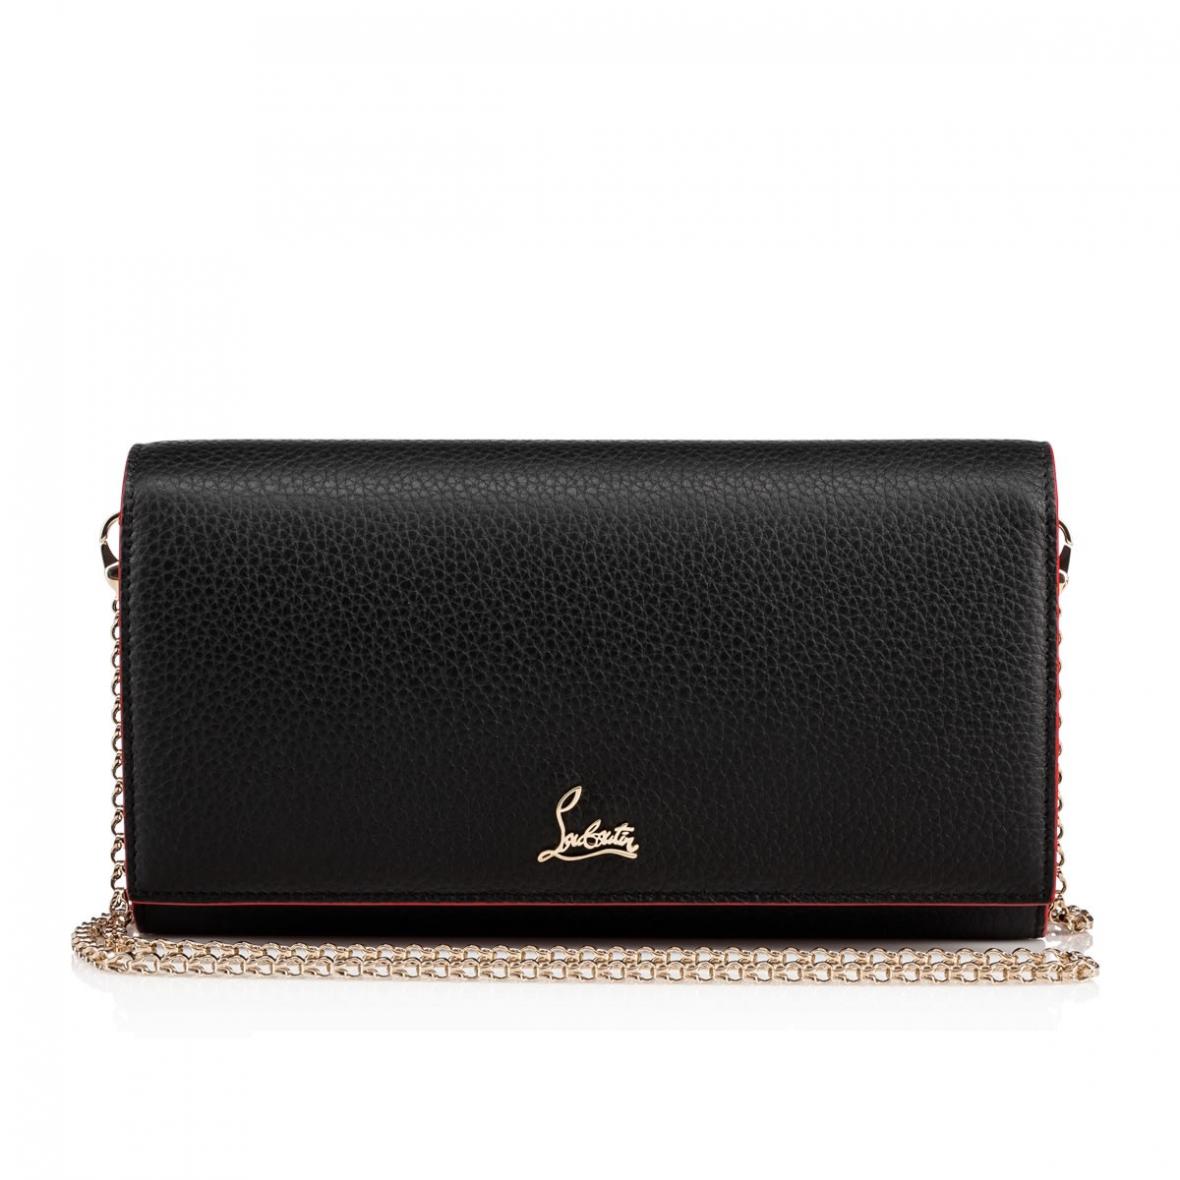 Christian Louboutin Small Leather Goods & Accessories – Womens Boudoir  Chain Wallet Black